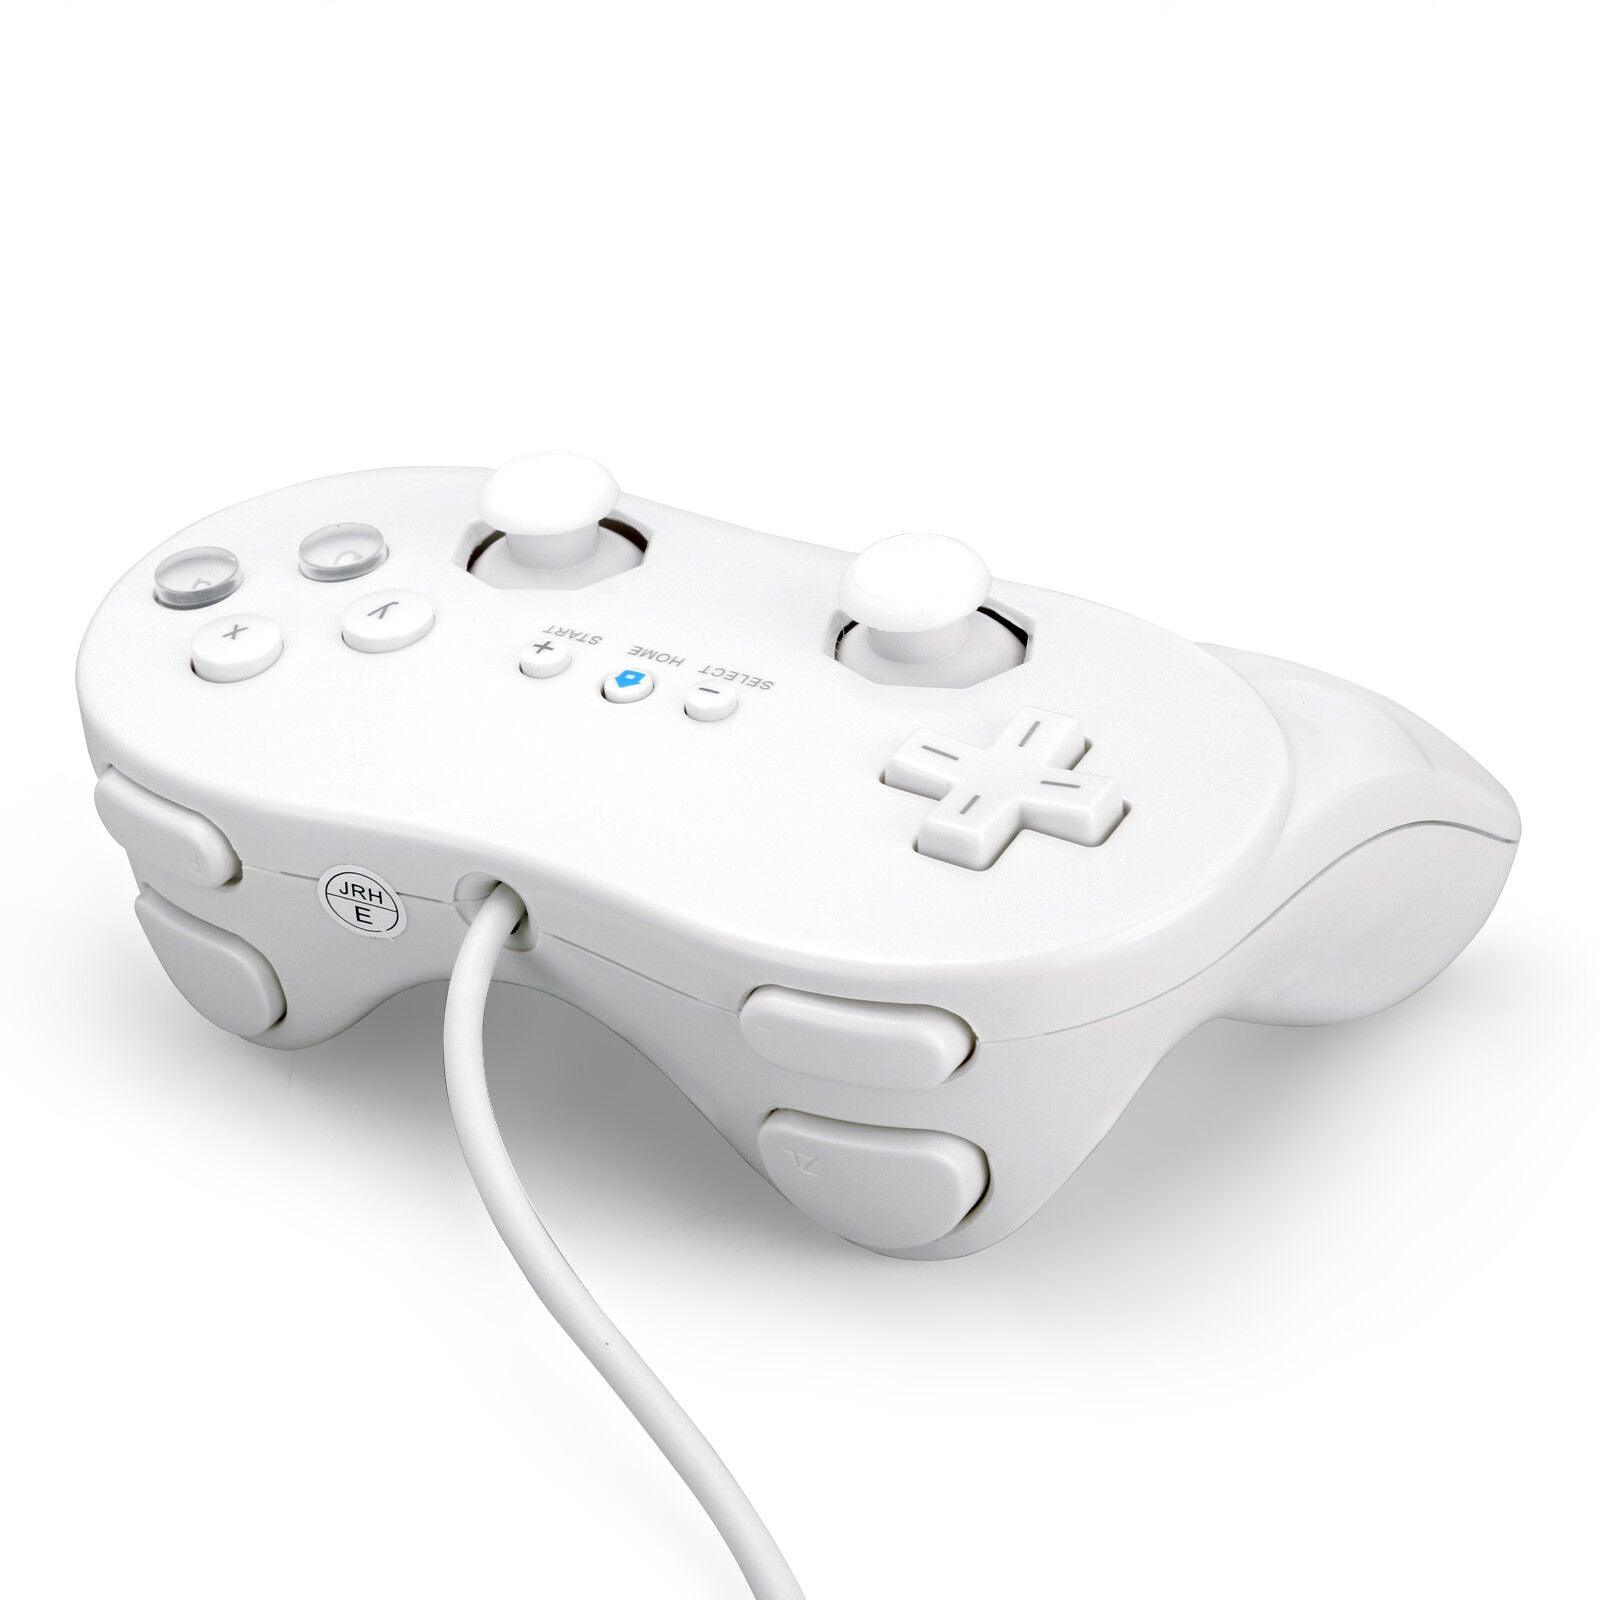 2 New White Classic Pro Wired GamePad Joypad Controller for Nintendo Wii Console - Office Catch